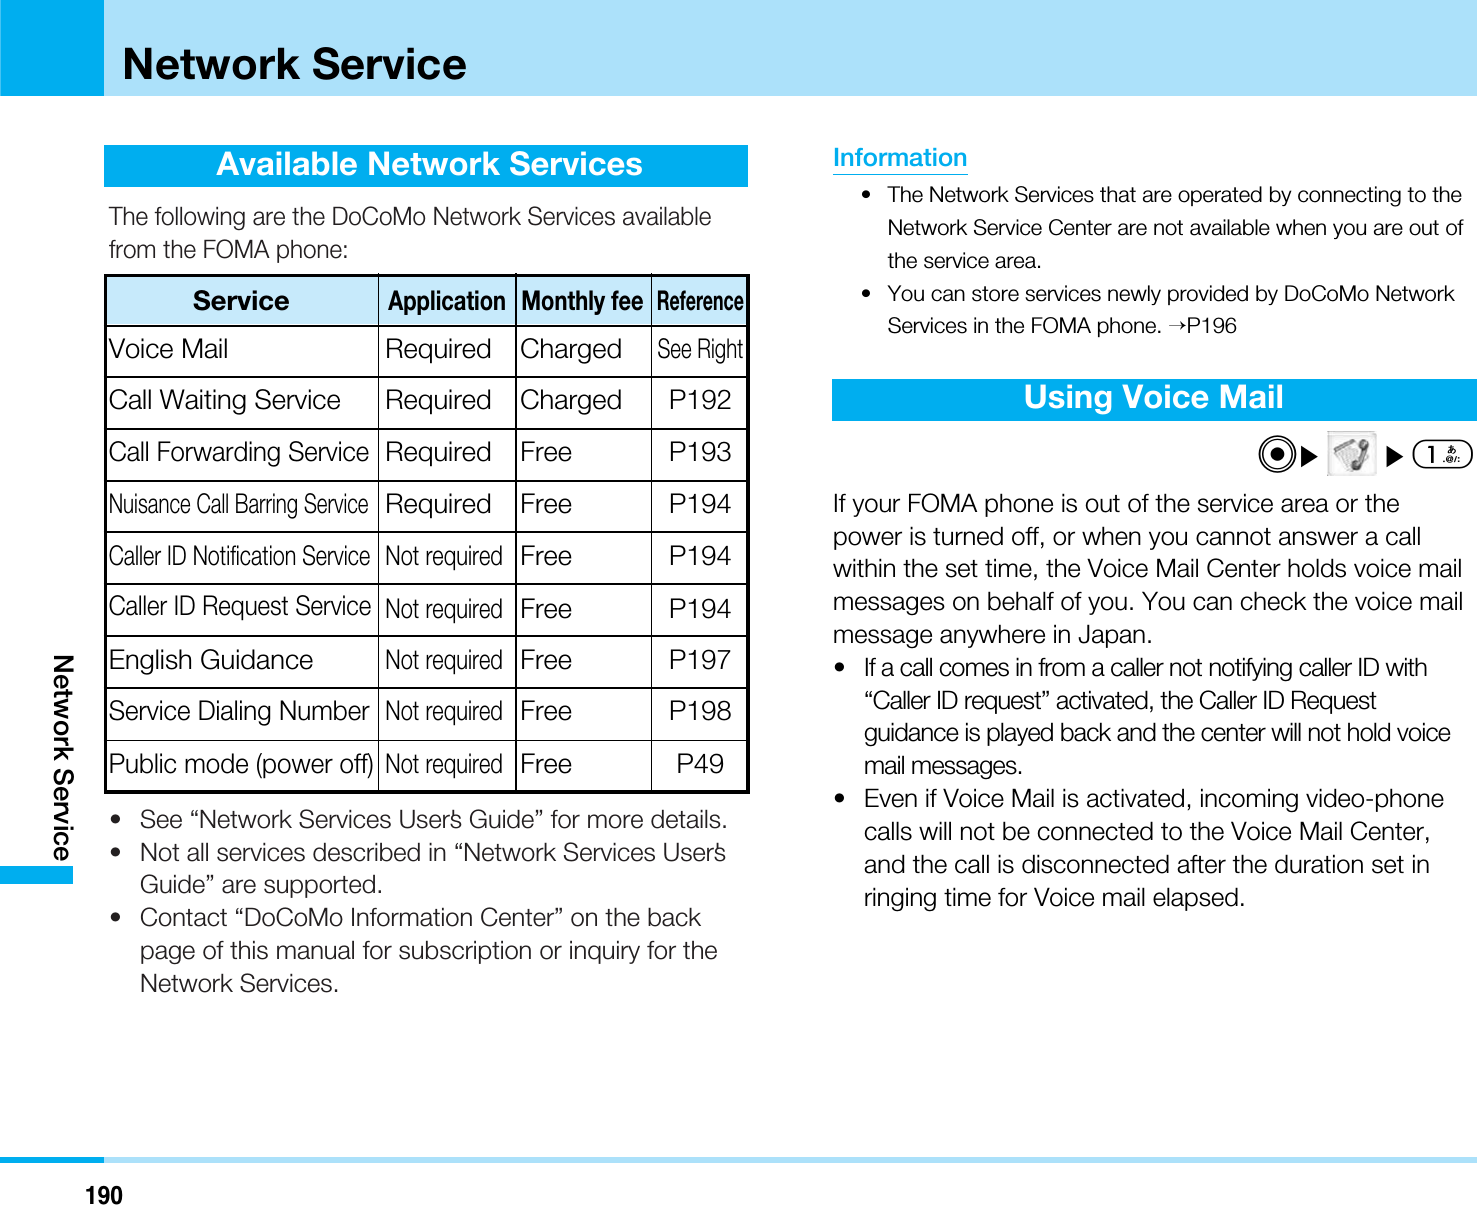 Available Network ServicesThe following are the DoCoMo Network Services availablefrom the FOMA phone:• See “Network Services User&apos;s Guide” for more details.• Not all services described in “Network Services User&apos;sGuide” are supported.• Contact “DoCoMo Information Center” on the backpage of this manual for subscription or inquiry for theNetwork Services.Information• The Network Services that are operated by connecting to theNetwork Service Center are not available when you are out ofthe service area.• You can store services newly provided by DoCoMo NetworkServices in the FOMA phone. &gt;P196Using Voice MailC]]1If your FOMA phone is out of the service area or thepower is turned off, or when you cannot answer a callwithin the set time, the Voice Mail Center holds voice mailmessages on behalf of you. You can check the voice mailmessage anywhere in Japan.•If a call comes in from a caller not notifying caller ID with“Caller ID request” activated, the Caller ID Requestguidance is played back and the center will not hold voicemail messages.• Even if Voice Mail is activated, incoming video-phonecalls will not be connected to the Voice Mail Center,and the call is disconnected after the duration set inringing time for Voice mail elapsed.190Network ServiceNetwork ServiceServiceReferenceMonthly feeApplicationVoice MailSee RightChargedRequiredCall Waiting Service P192ChargedRequiredCall Forwarding ServiceP193FreeRequiredNuisance Call Barring ServiceP194FreeRequiredP194FreeNot requiredCaller ID Notification ServiceP194FreeNot requiredEnglish GuidanceNot requiredFree P197Service Dialing NumberNot requiredFree P198Caller ID Request ServicePublic mode (power off)Not requiredFree P49